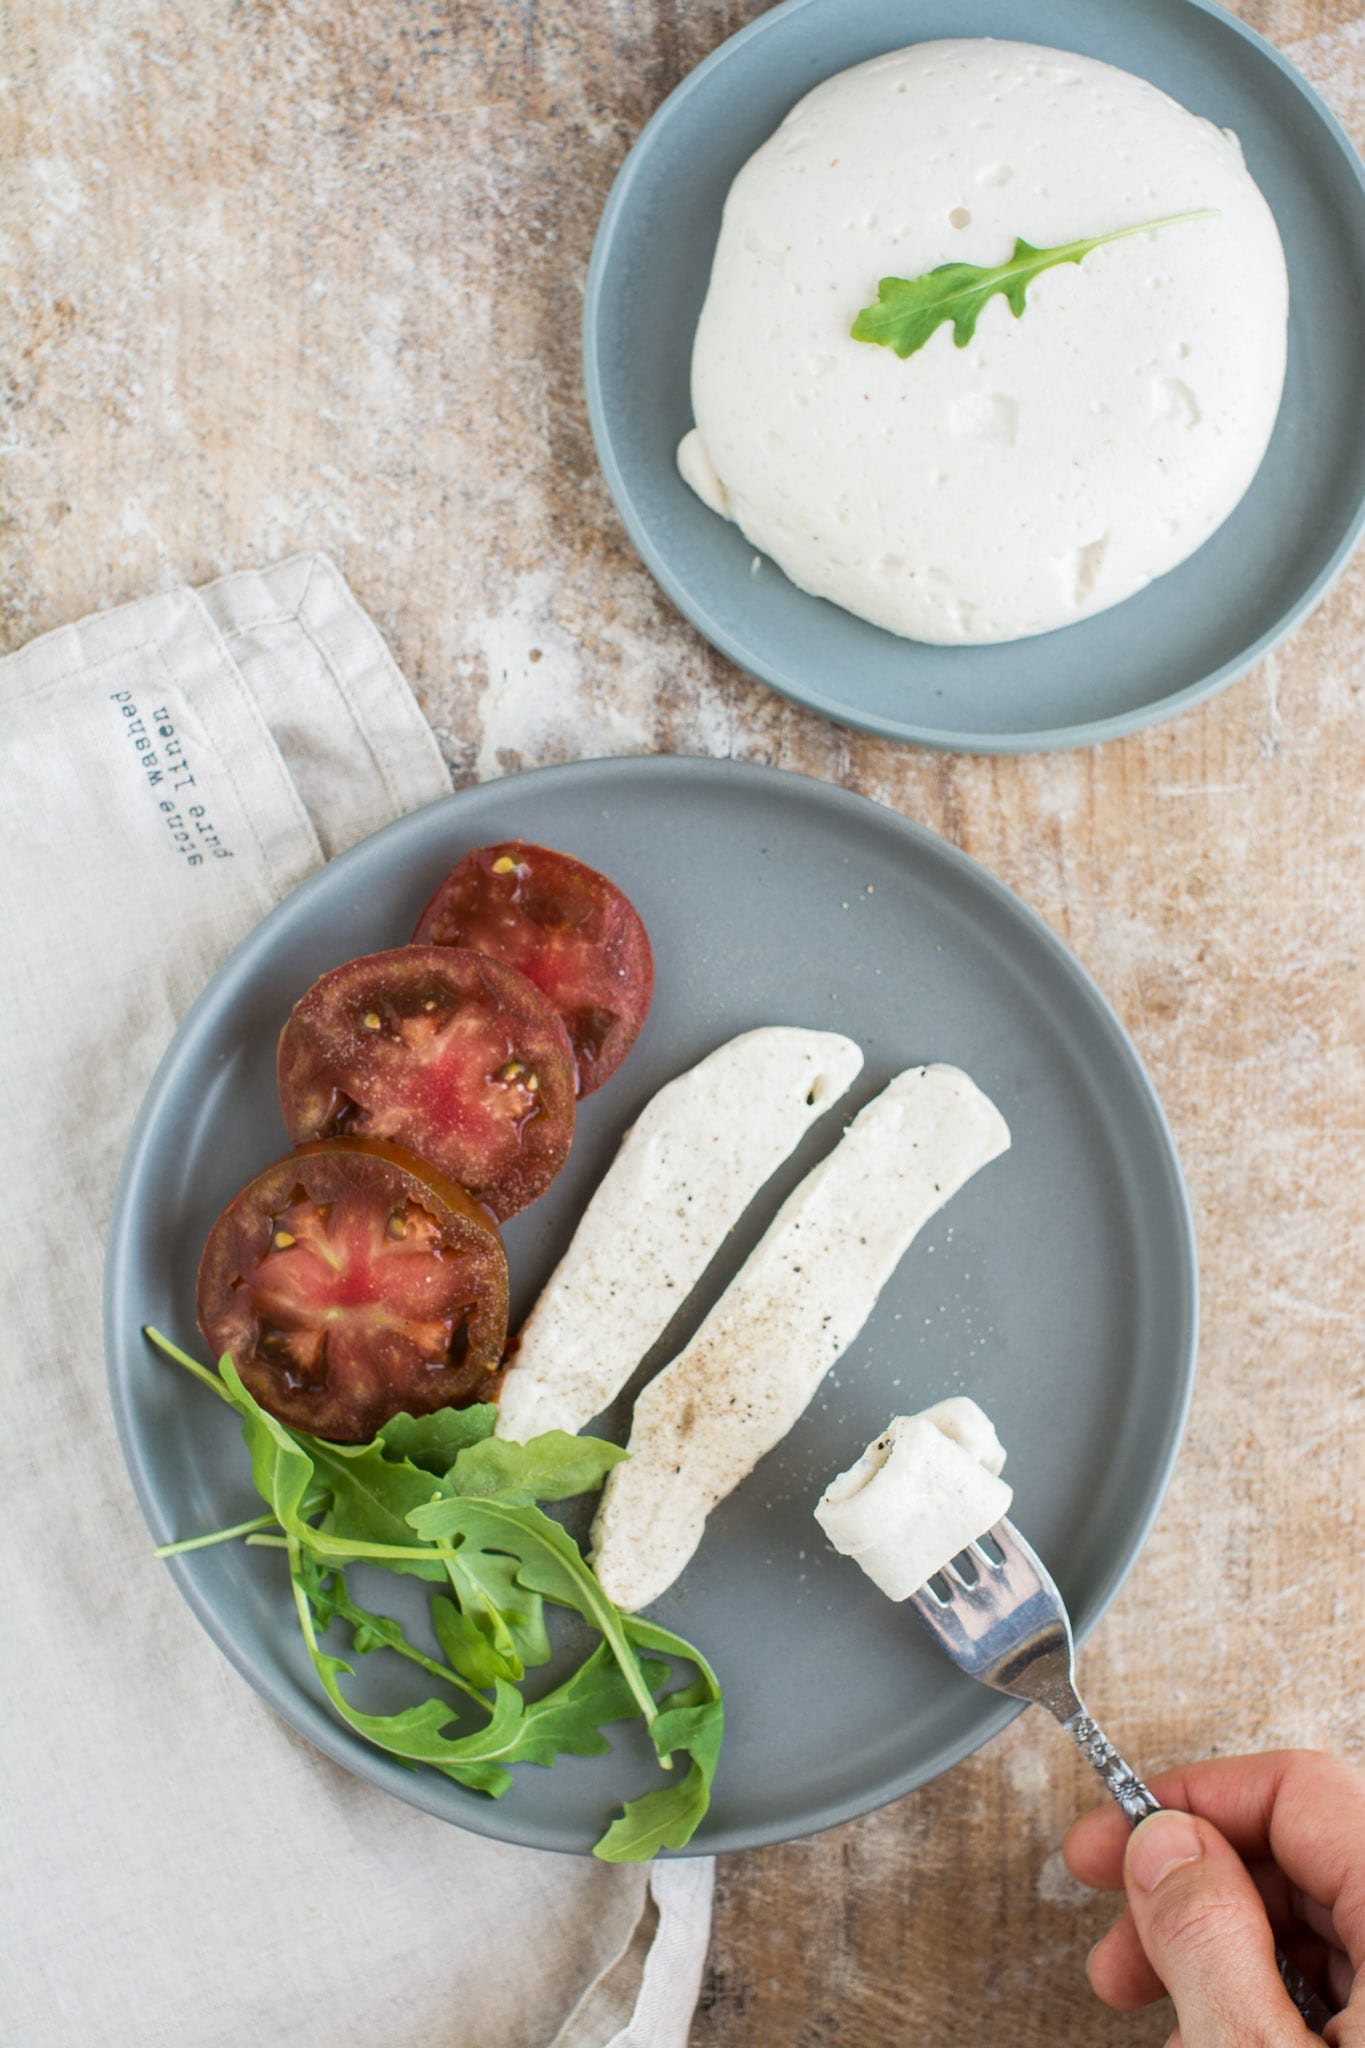 Cashew based vegan mozzarella cheese recipe that is oil-free and gluten-free yet so creamy, soft and tasty.